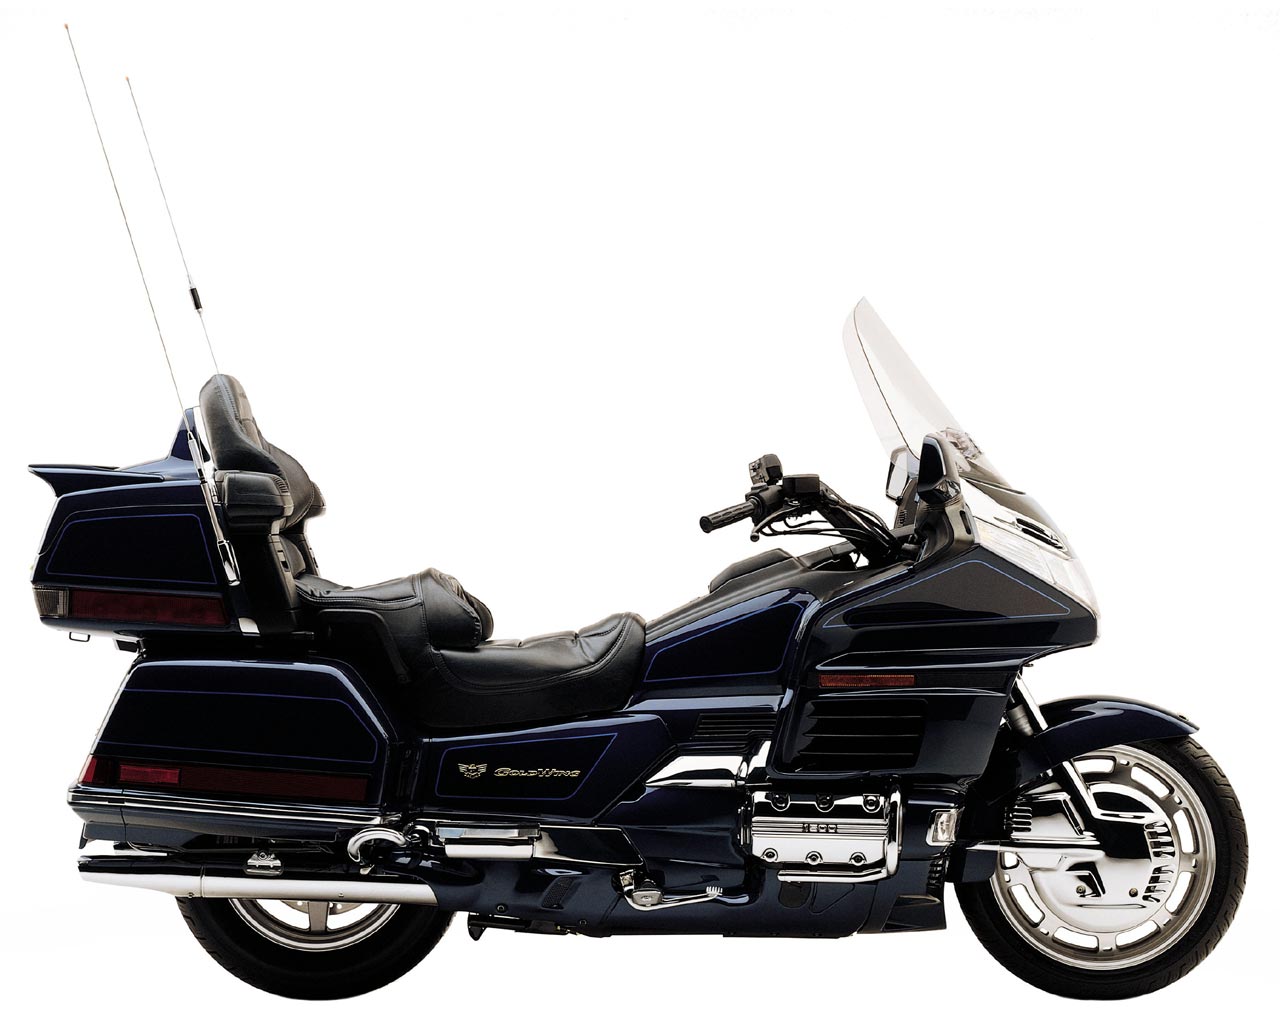 Who manufactures Gold Wing motorcycles?